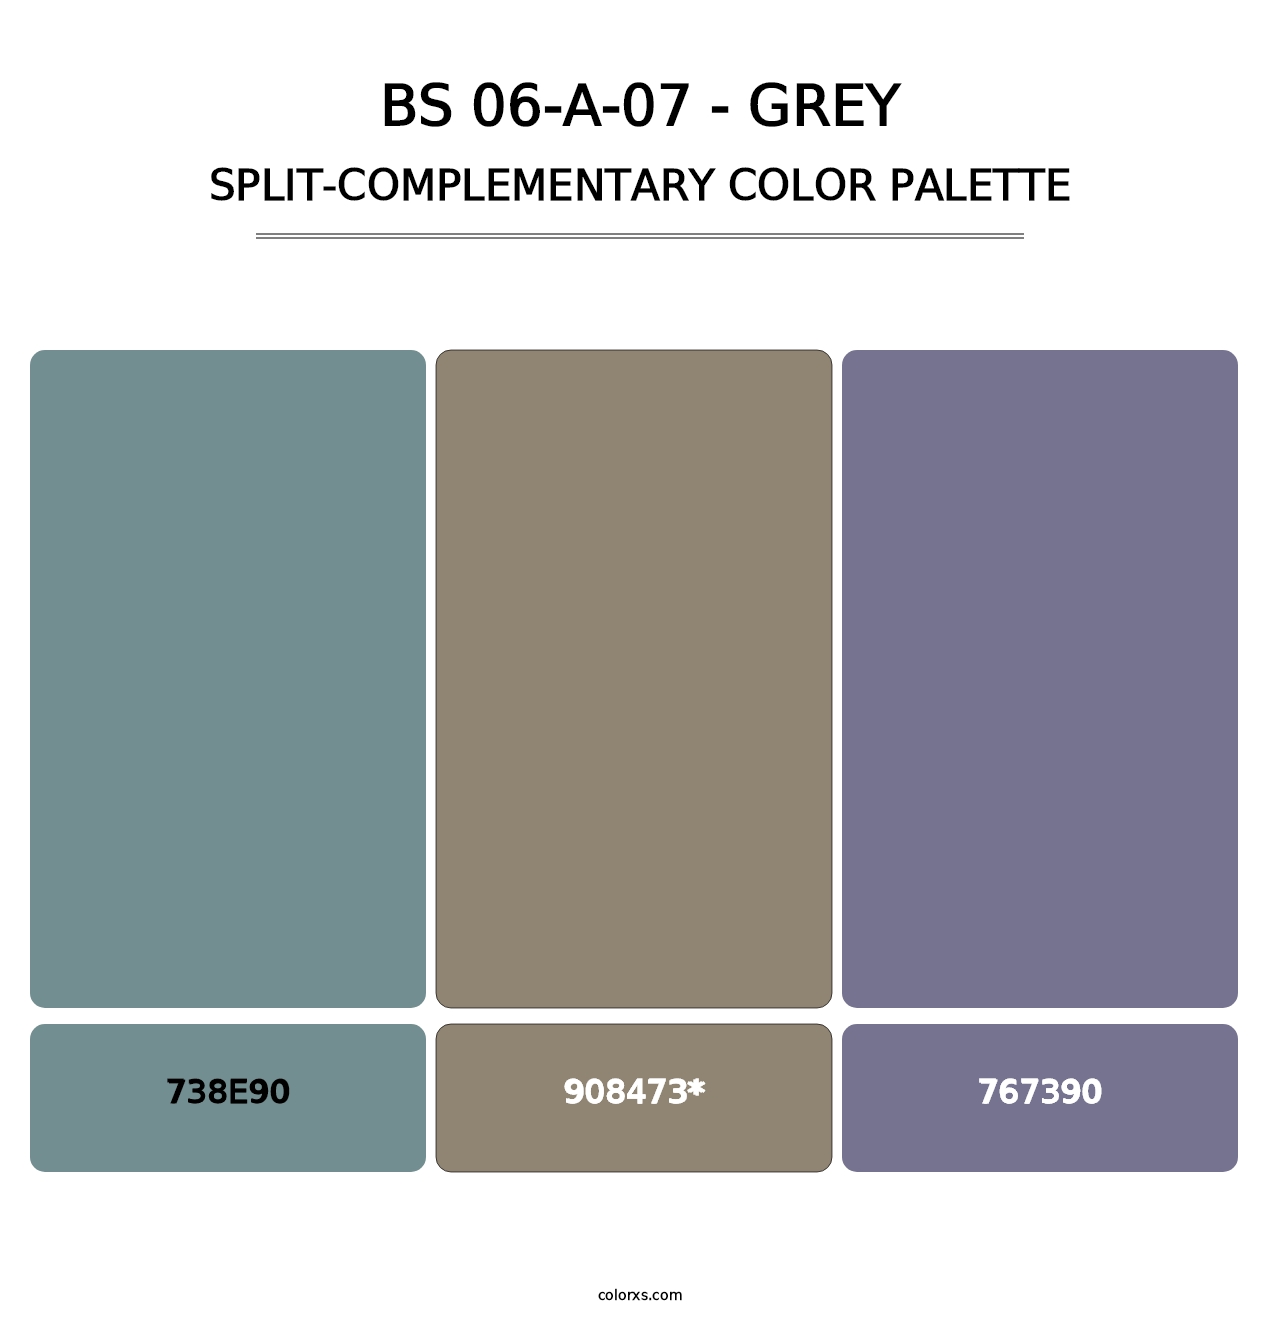 BS 06-A-07 - Grey - Split-Complementary Color Palette